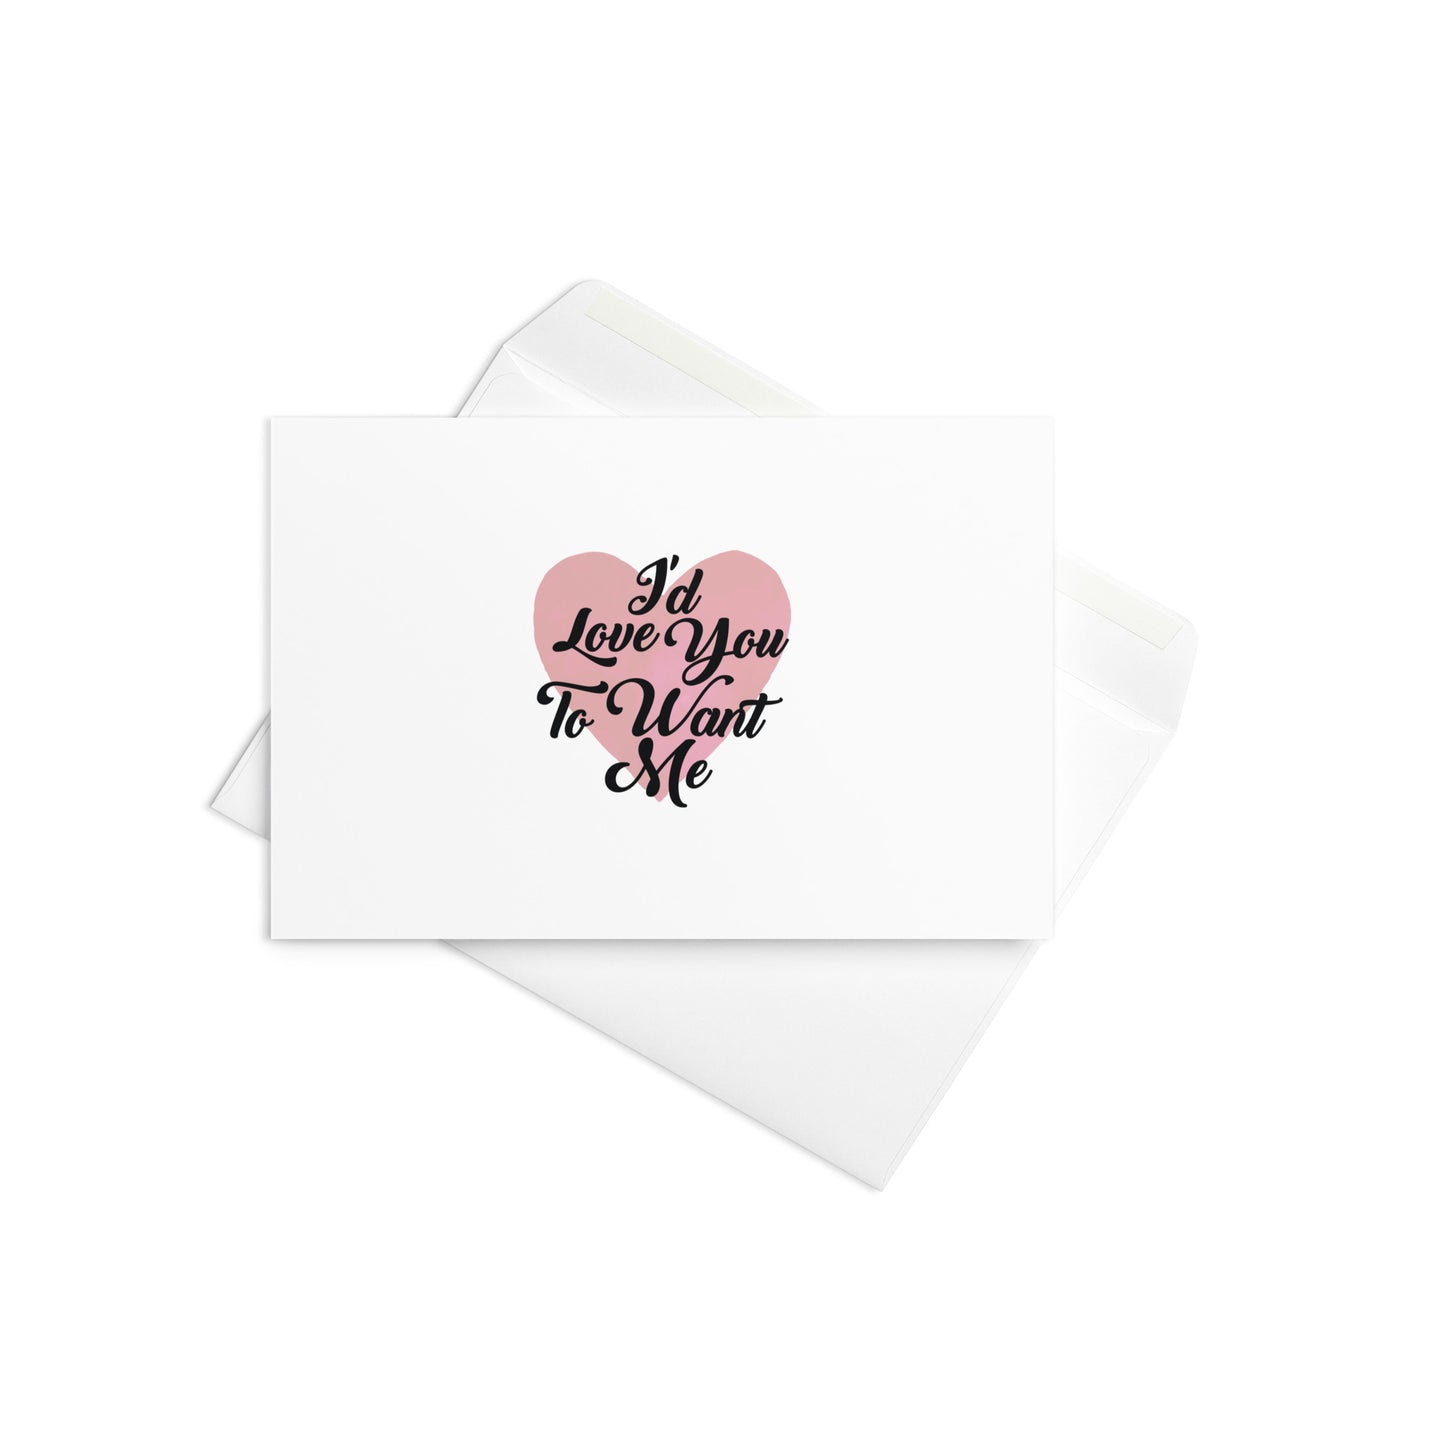 I'd Love You To Want Me Greeting Card (Heart Design)